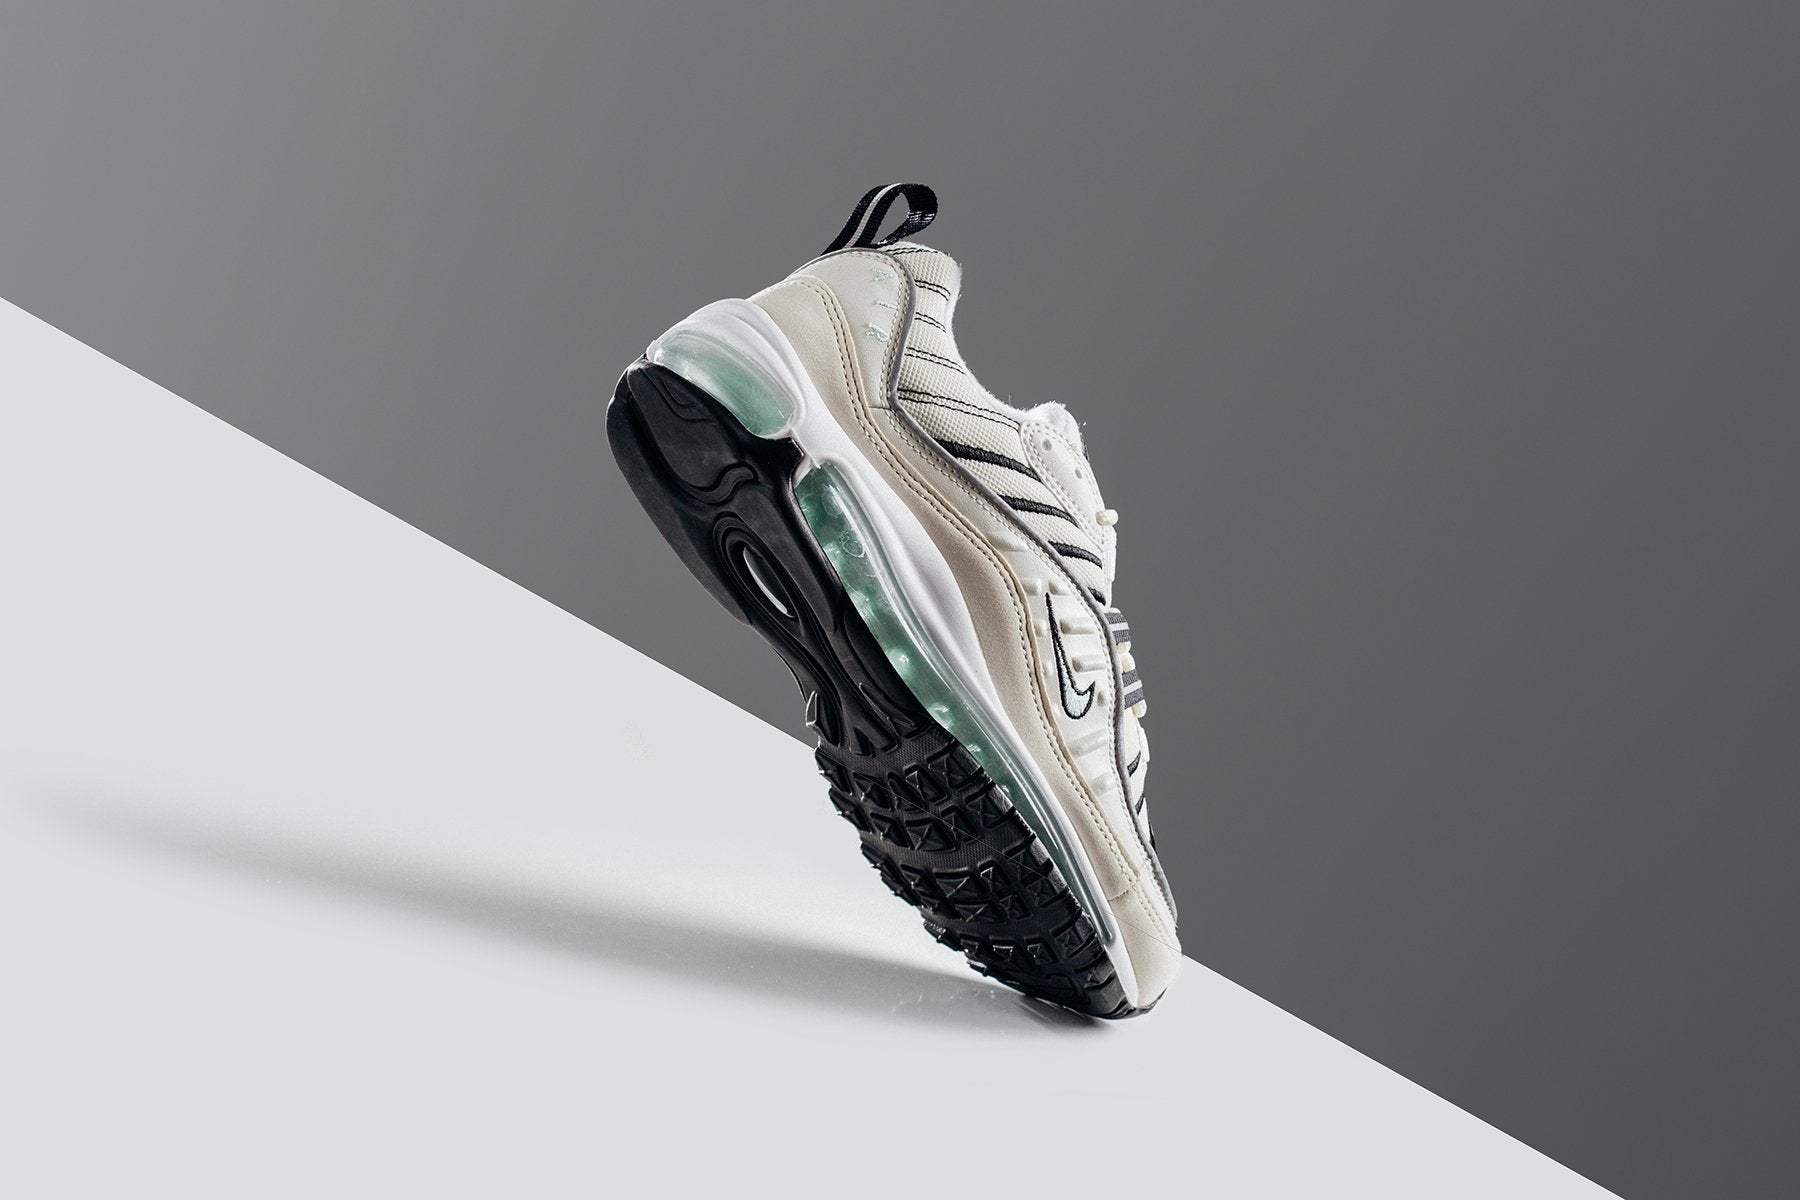 Víctor ansiedad bomba Nike Women's Air Max 98 "Sail/Igloo-Fossil" Available Now – Feature